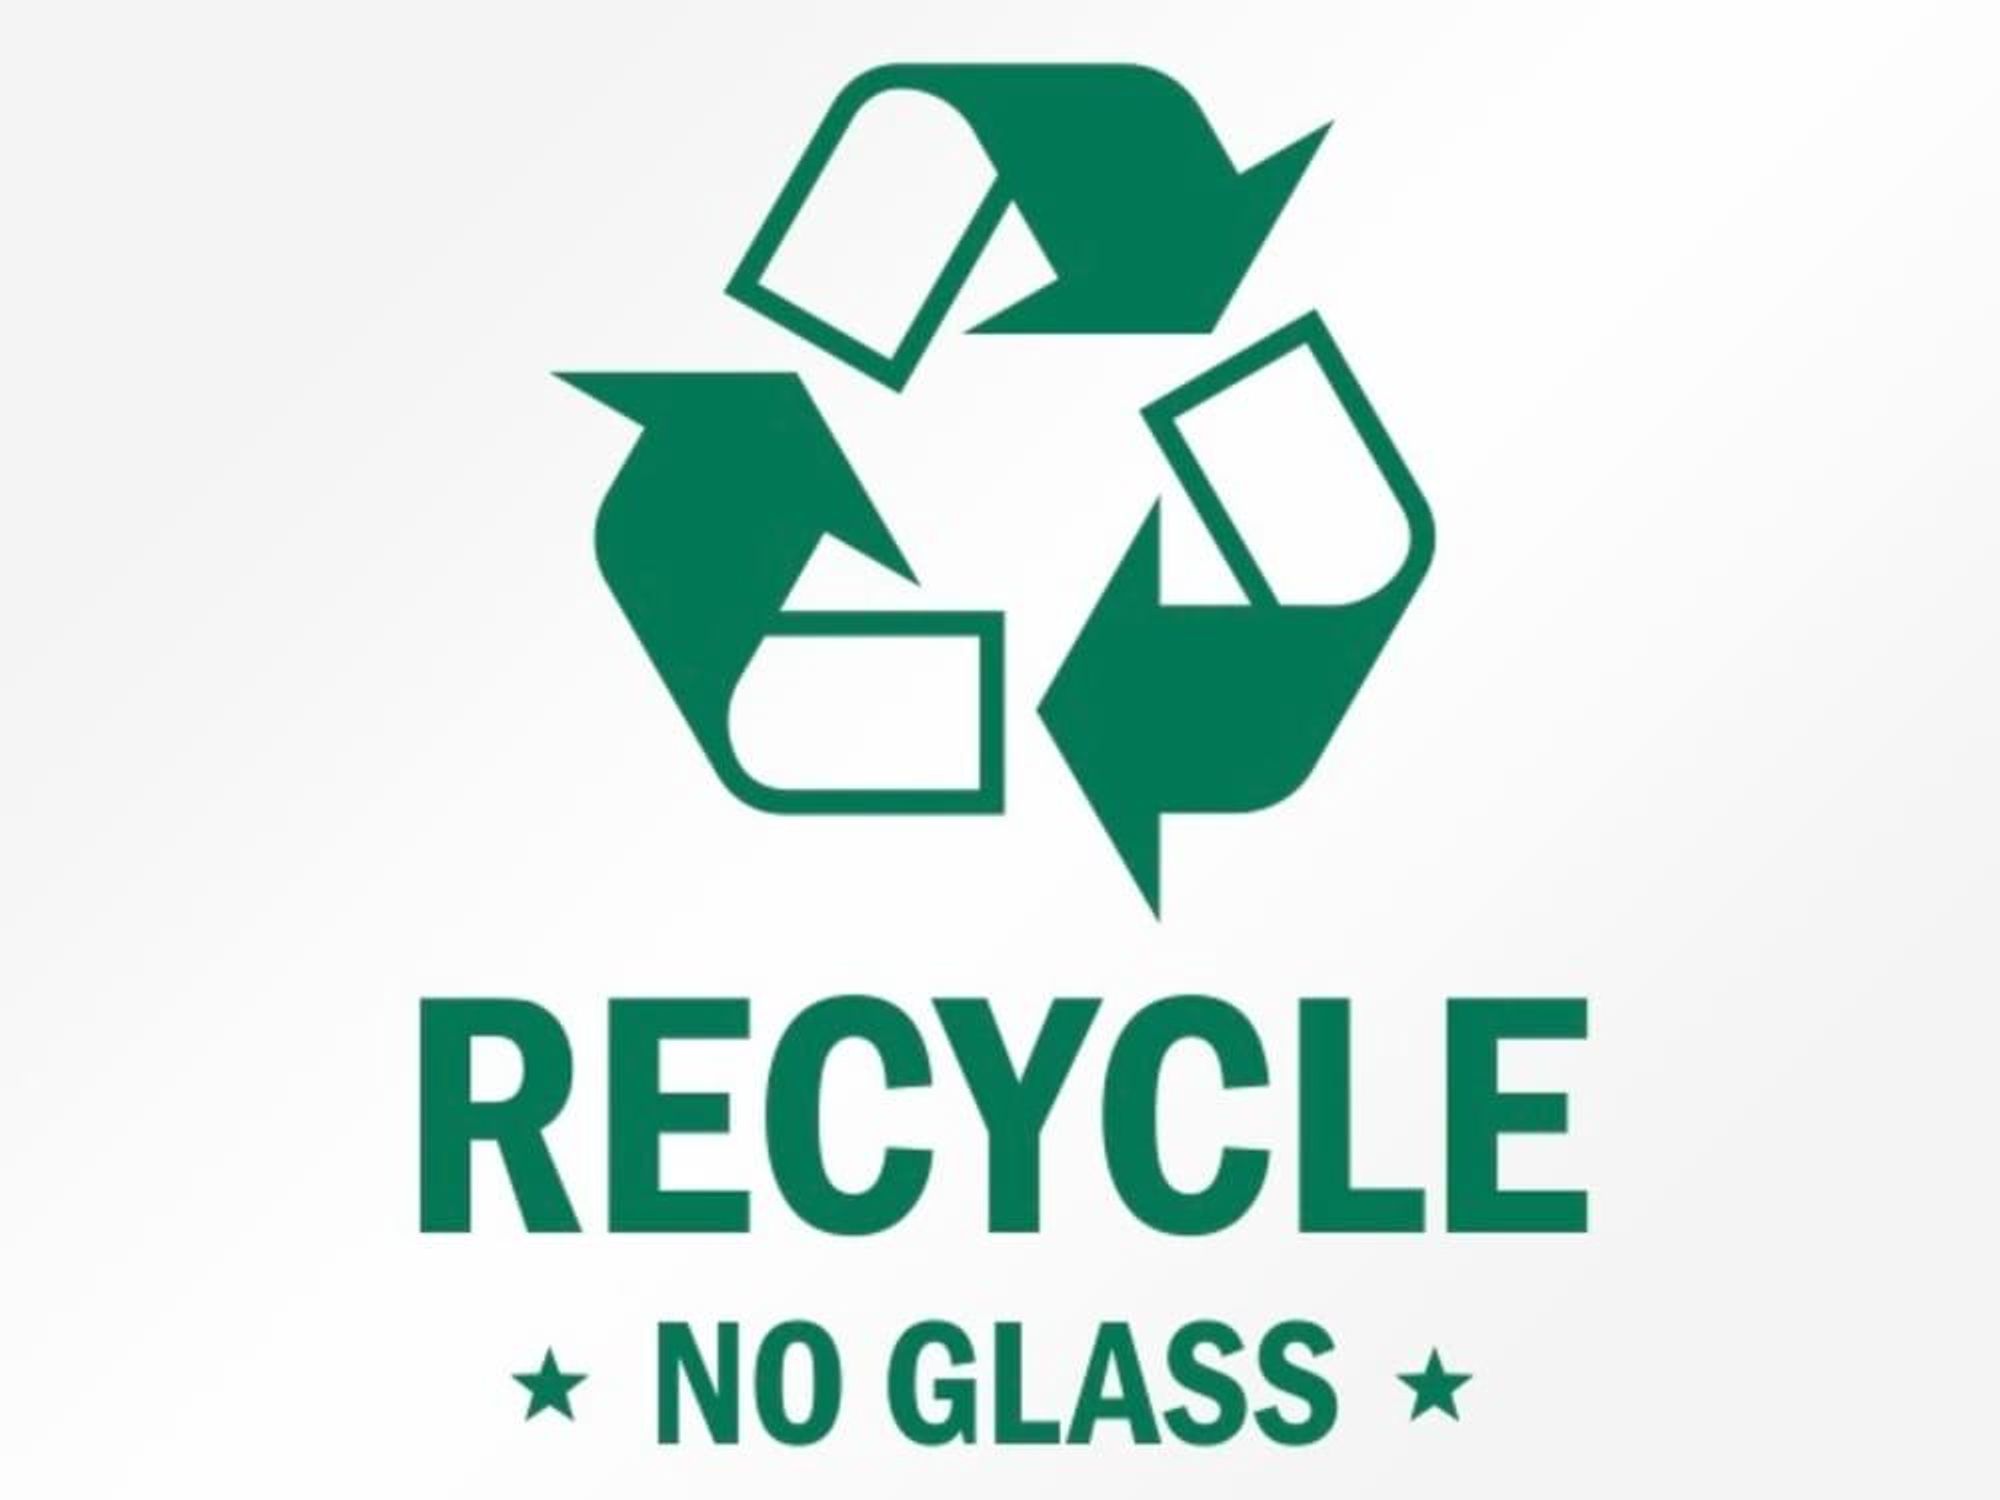 Recycle no glass sign